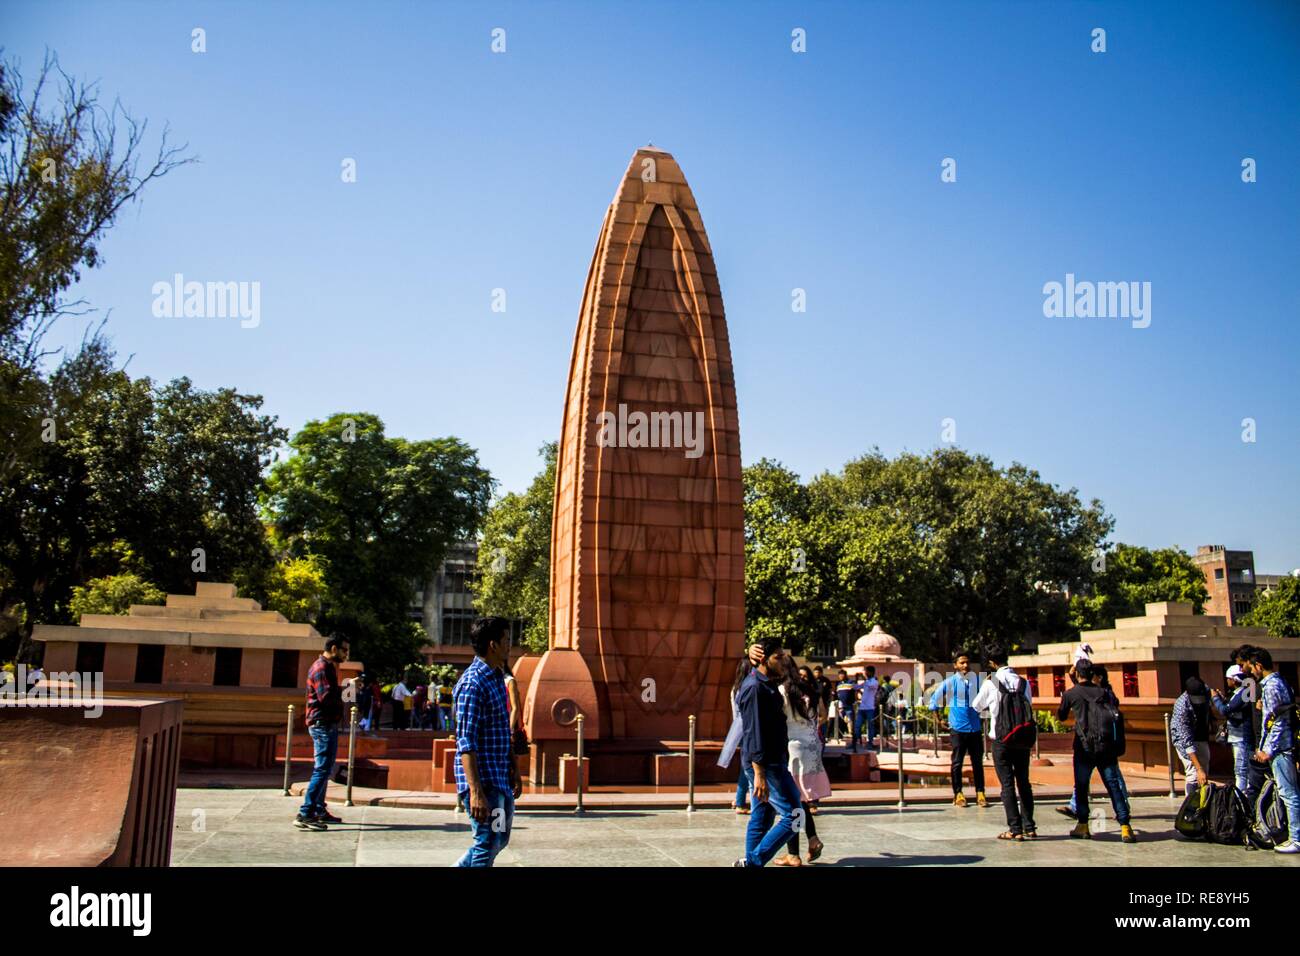 Memorial of the freedom fighters massacred by the colonialists. Stock Photo